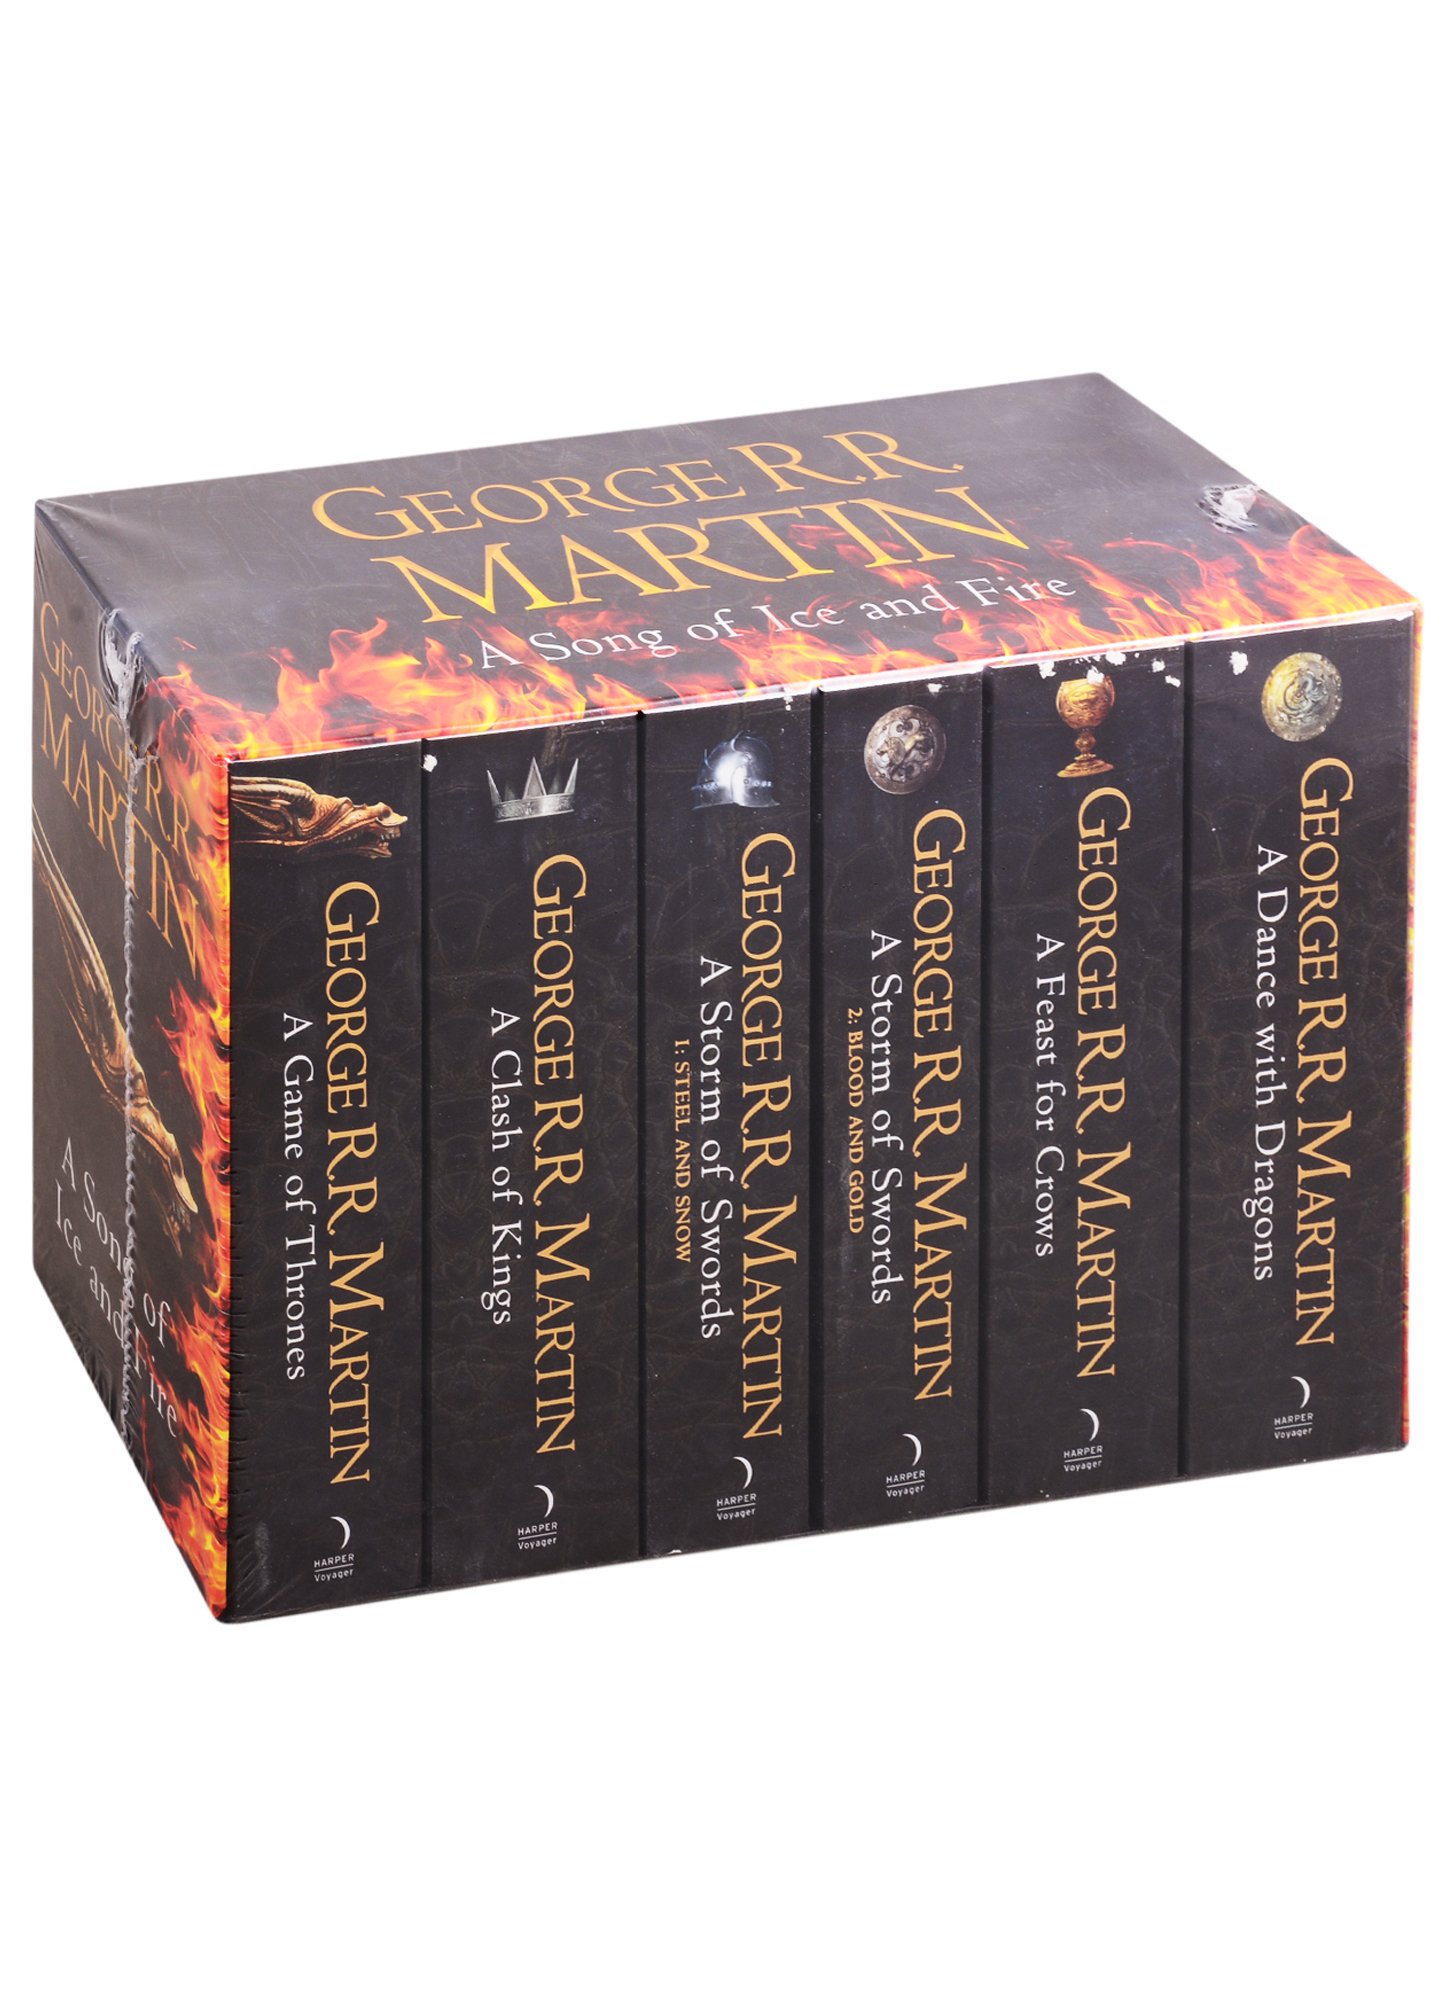 Song of Ice and Fire-Game of Thrones: The complete box set of all 6 books Martin George R. R. martin george r r a feast for crows